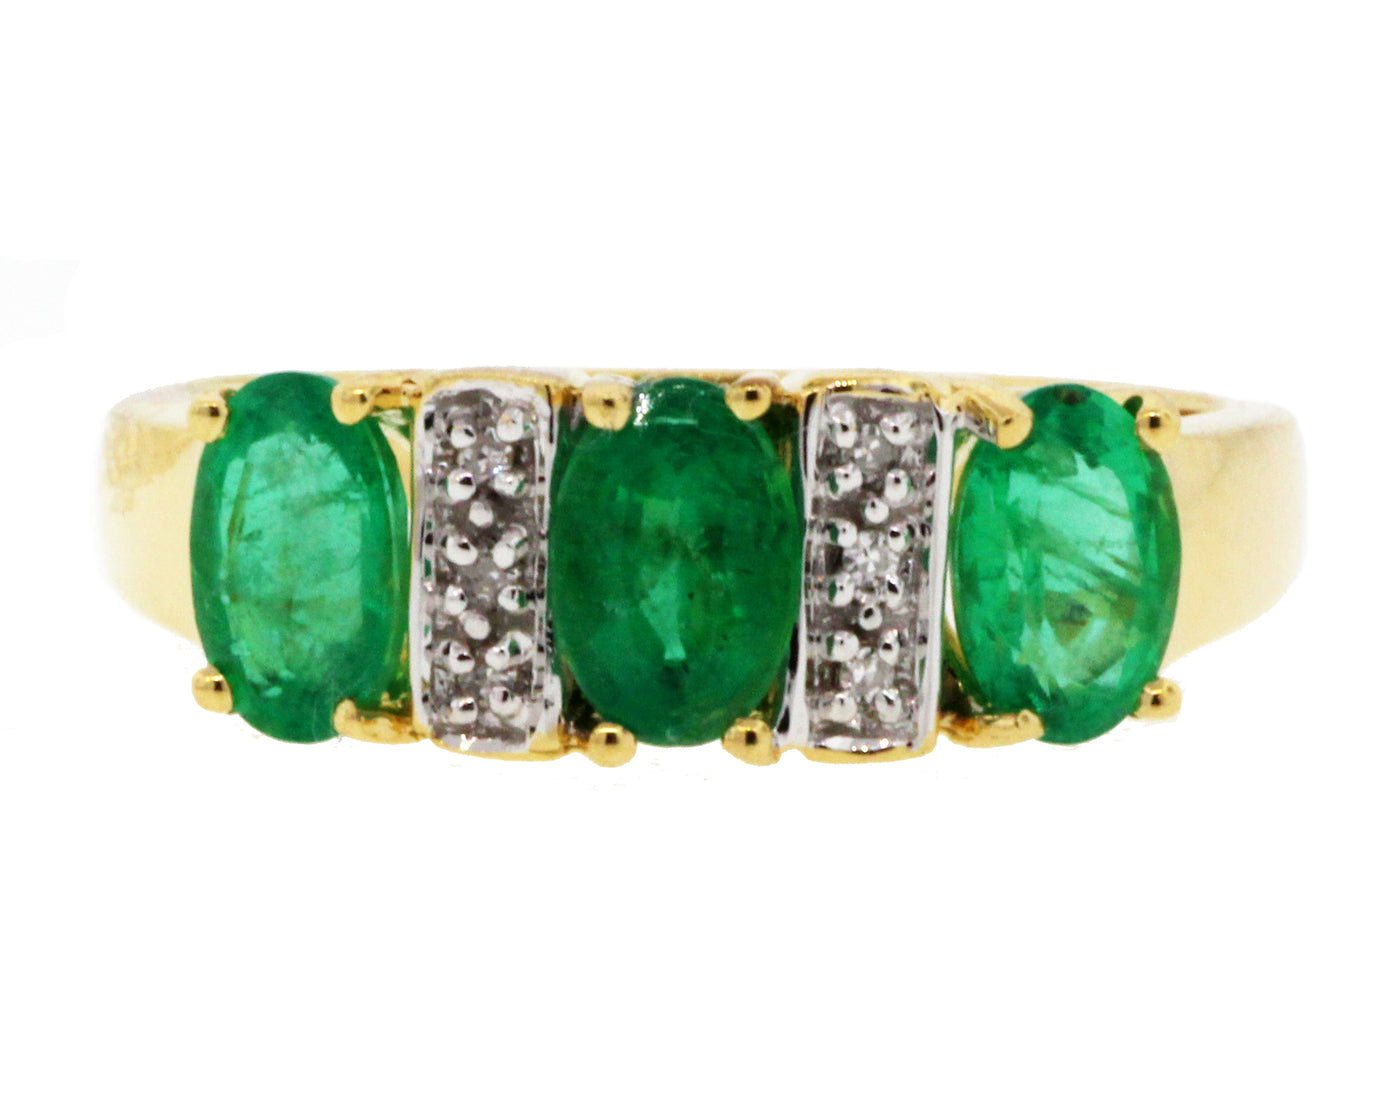 ESTATE 18KY EMERALD AND DIAMOND RING